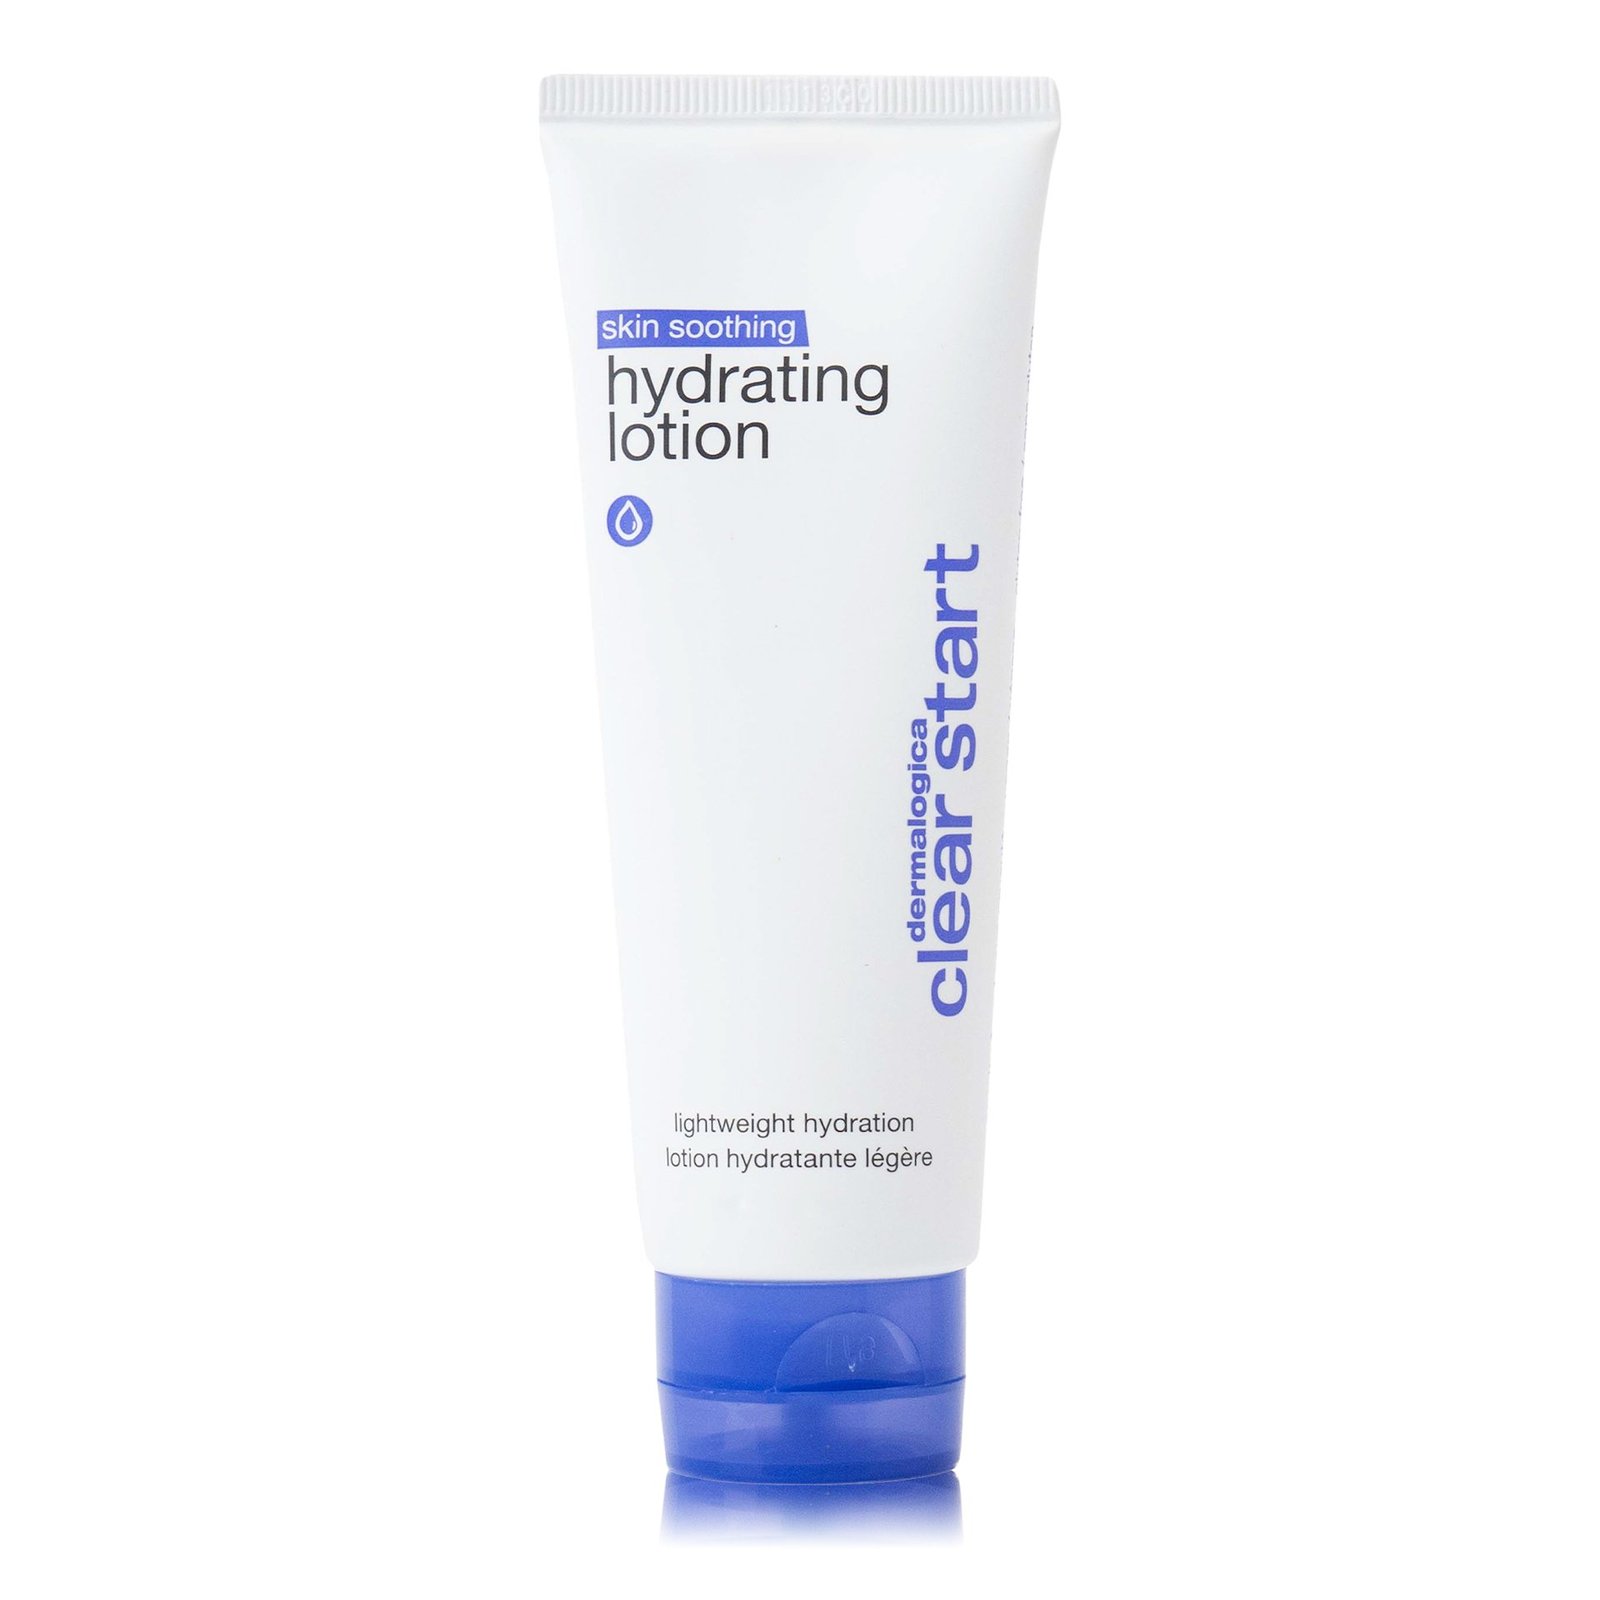 Clear Start by Dermalogica Skin Soothing Hydrating Lotion 59 ml